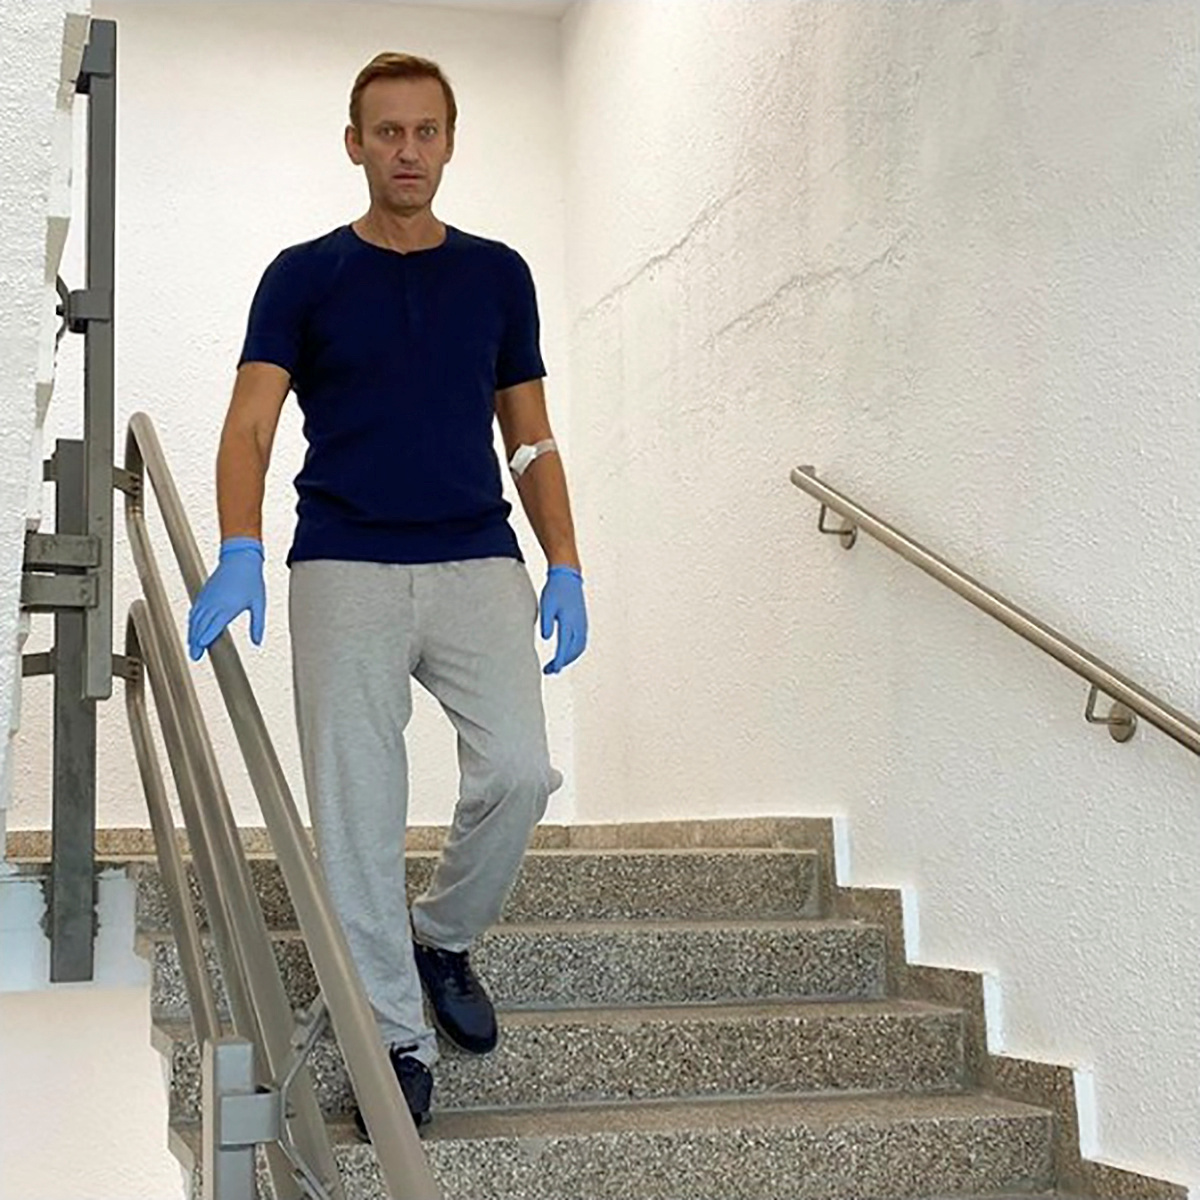 Russian opposition politician Alexei Navalny goes downstairs at Charite hospital in Berlin, Germany, in this undated image obtained from social media September 19, 2020. u00e2u20acu201d Reuters pic